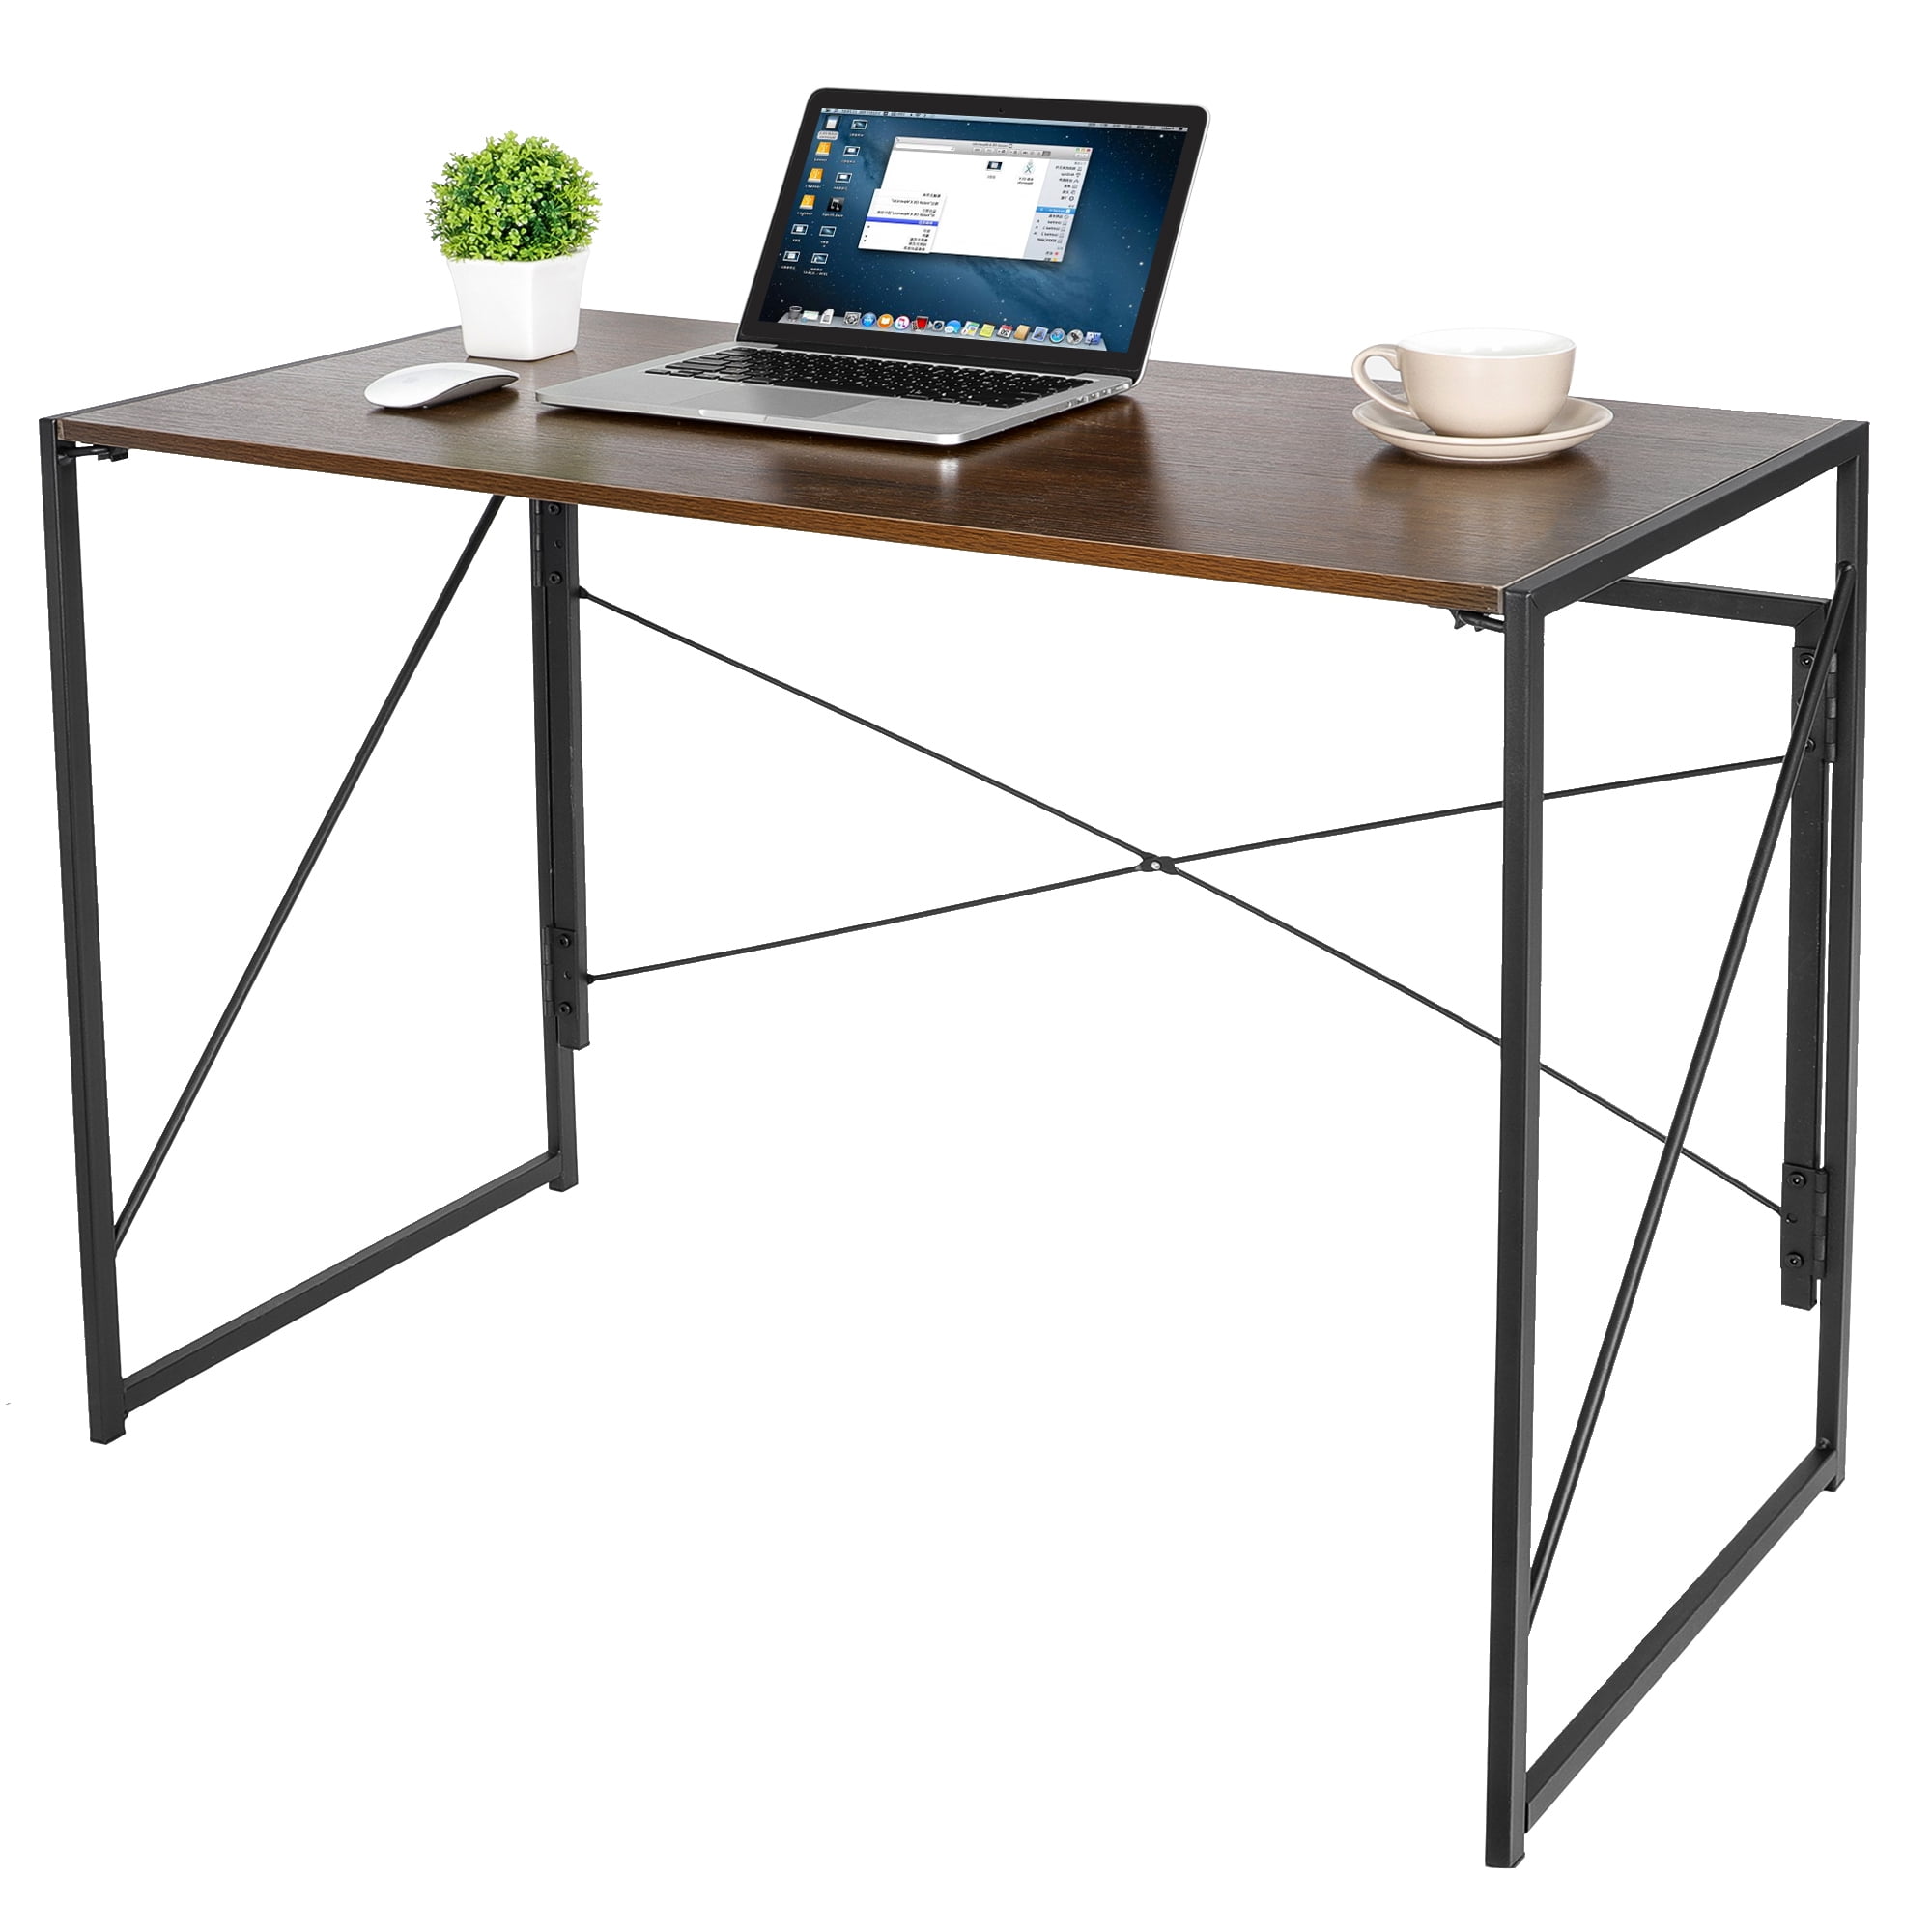 Folding Study Desk Simple Laptop Writing Table for Small Space Home Office Desk Computer Corner Table Best Gift Chil Black